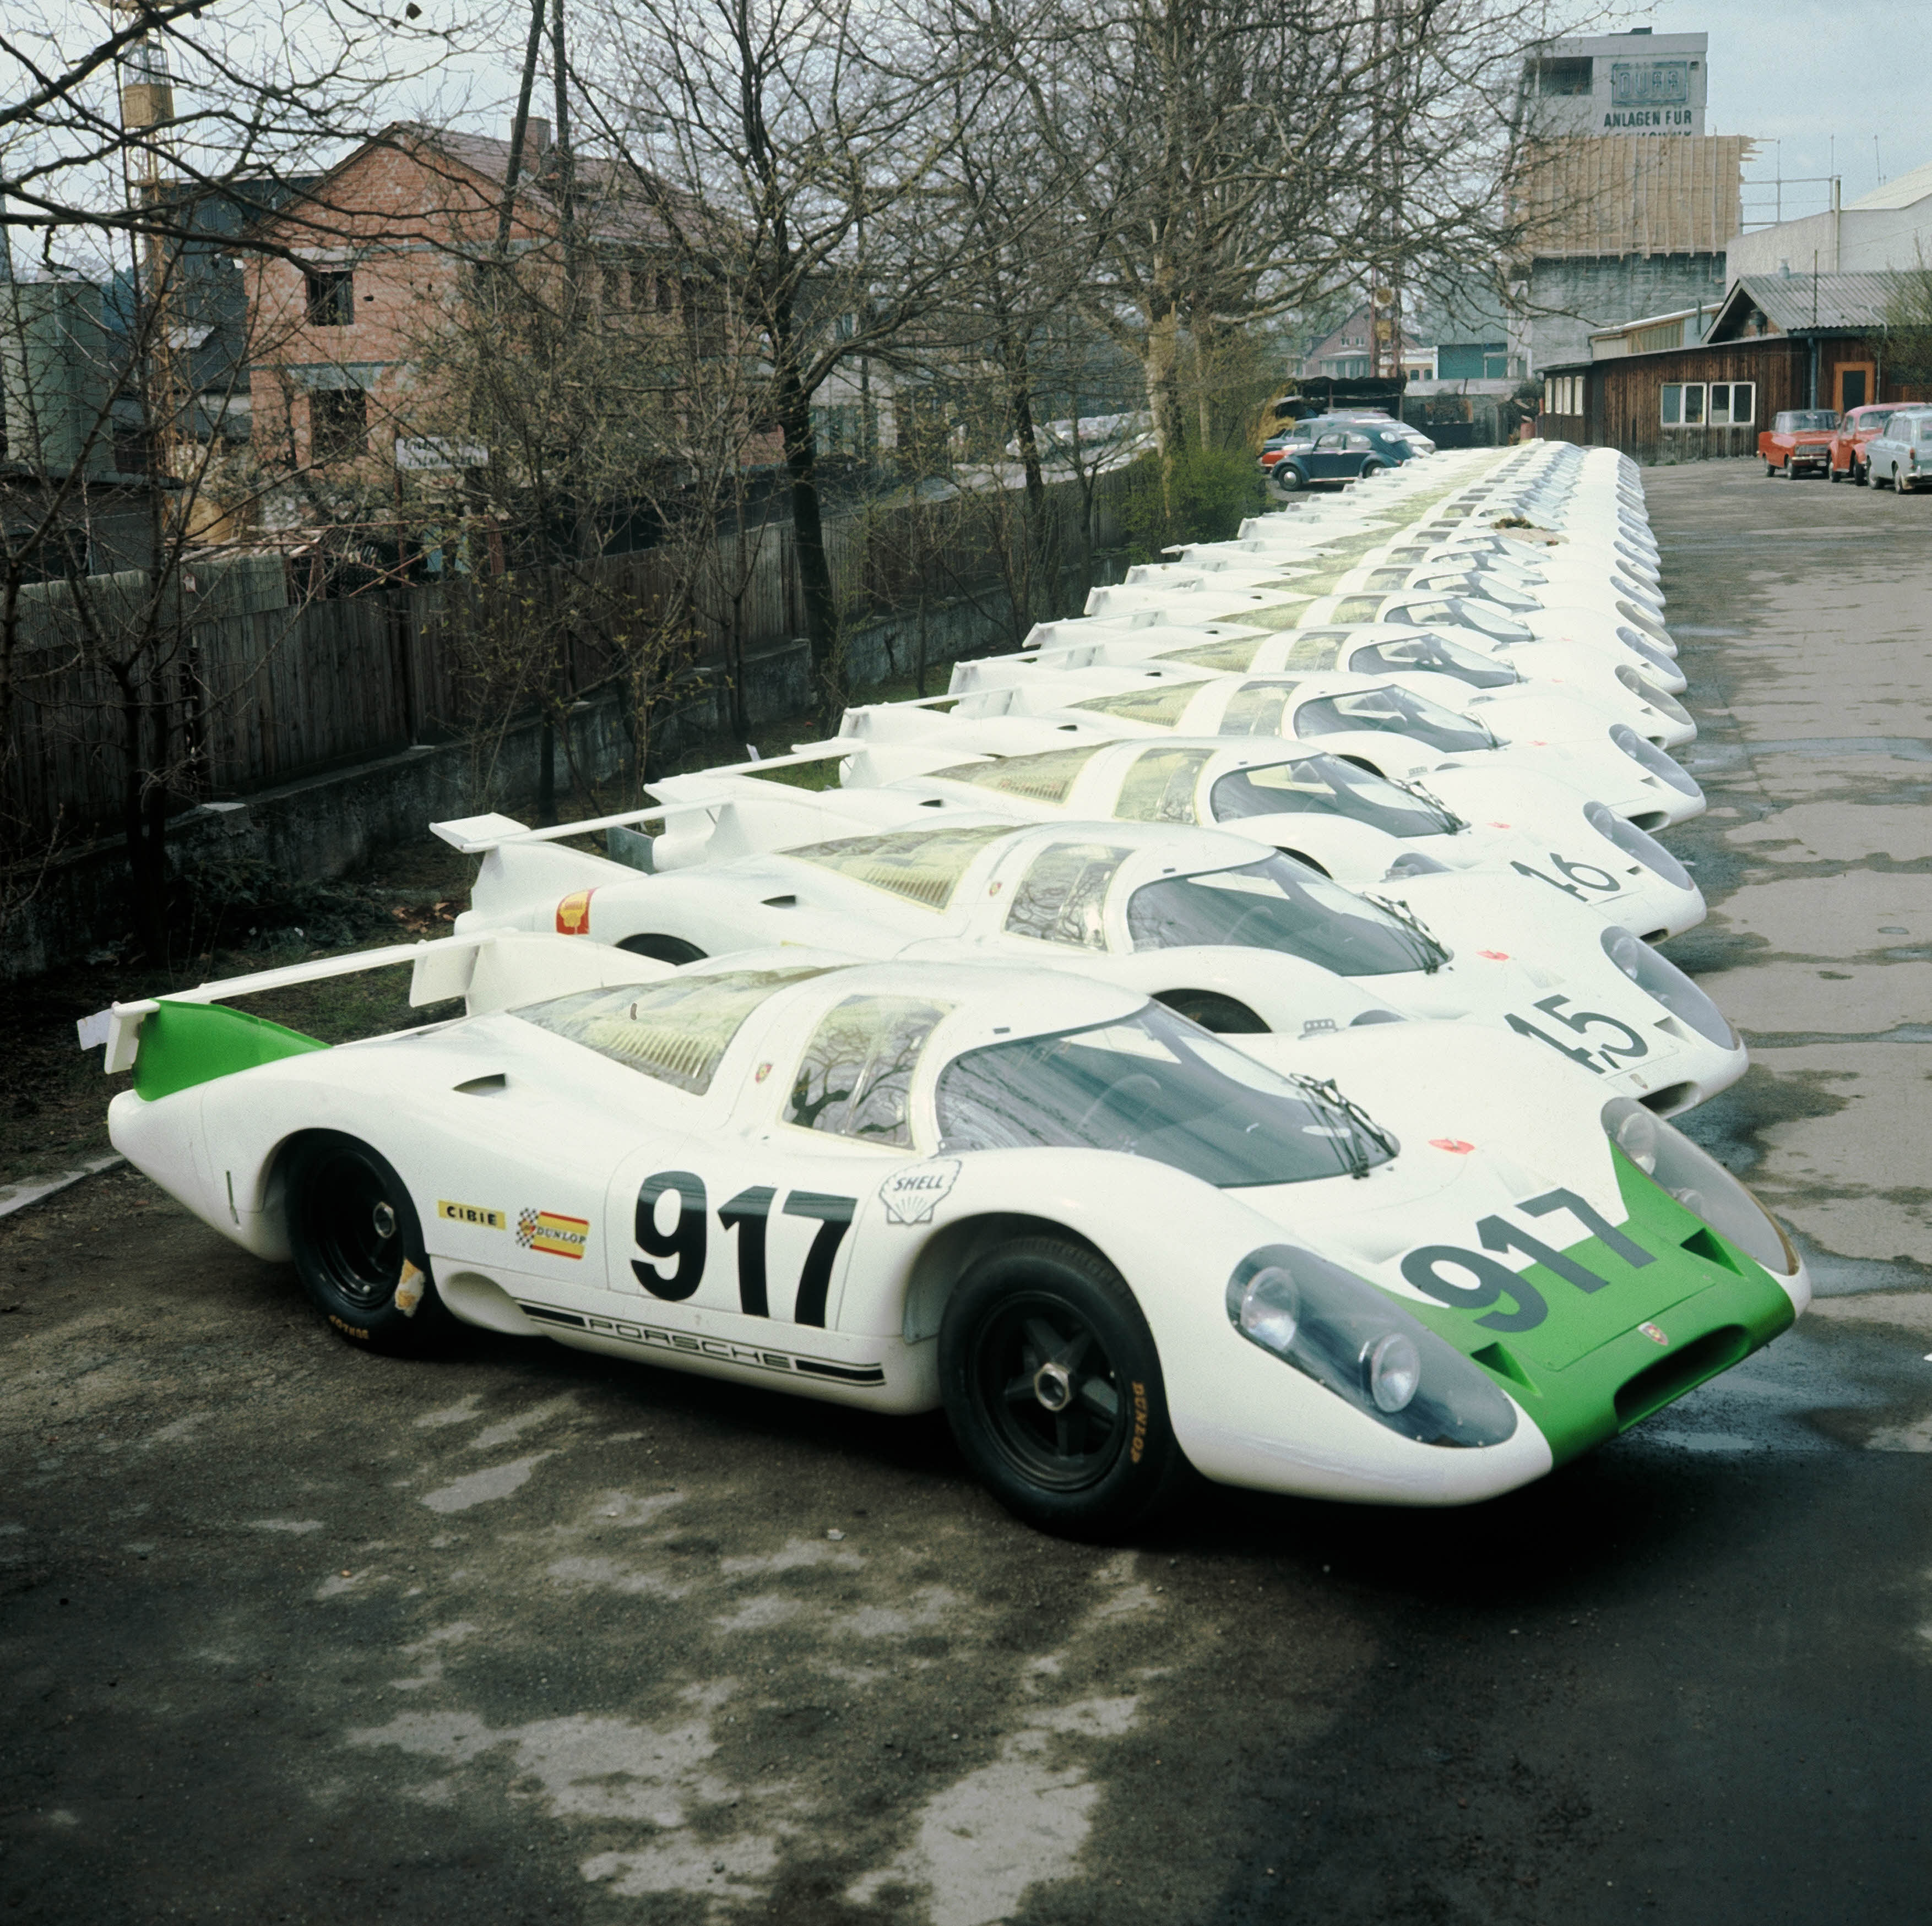 The first 25 Porsche 917s required to compete were presented to the International Sporting Commission in April 1969.